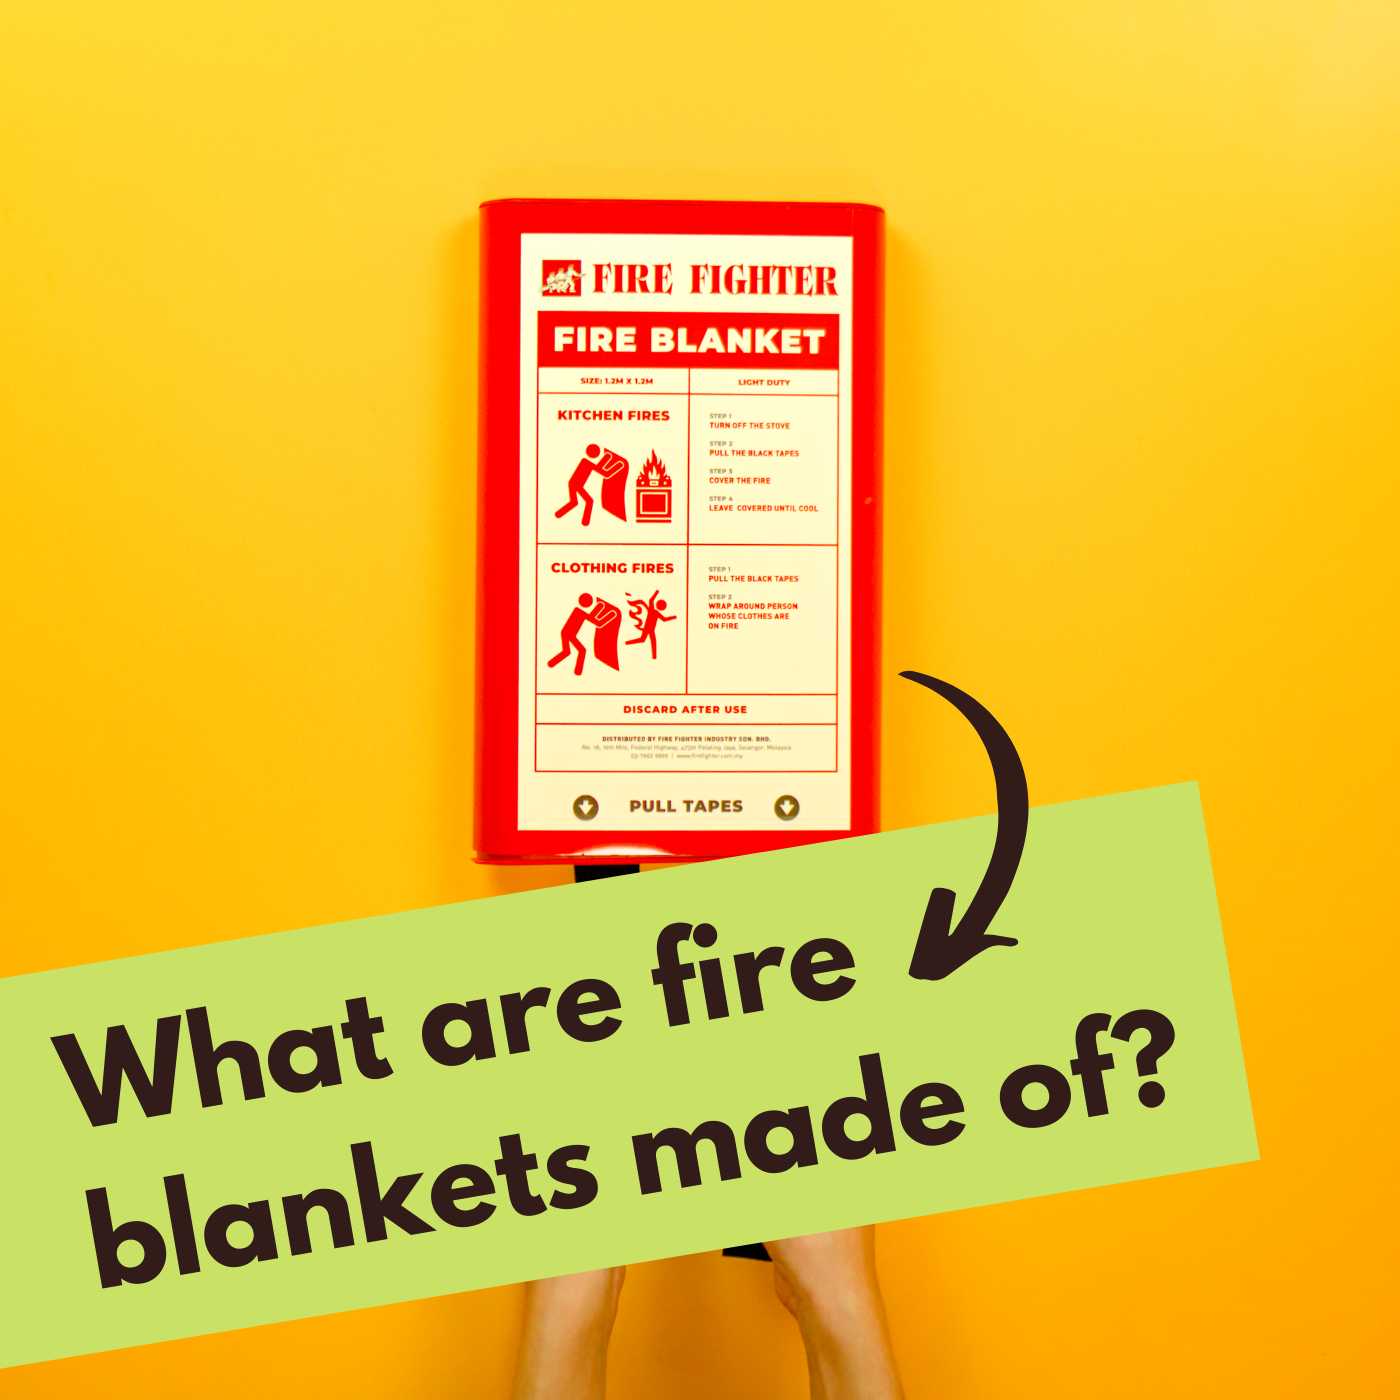 What are Fire blanket and what are they made of?